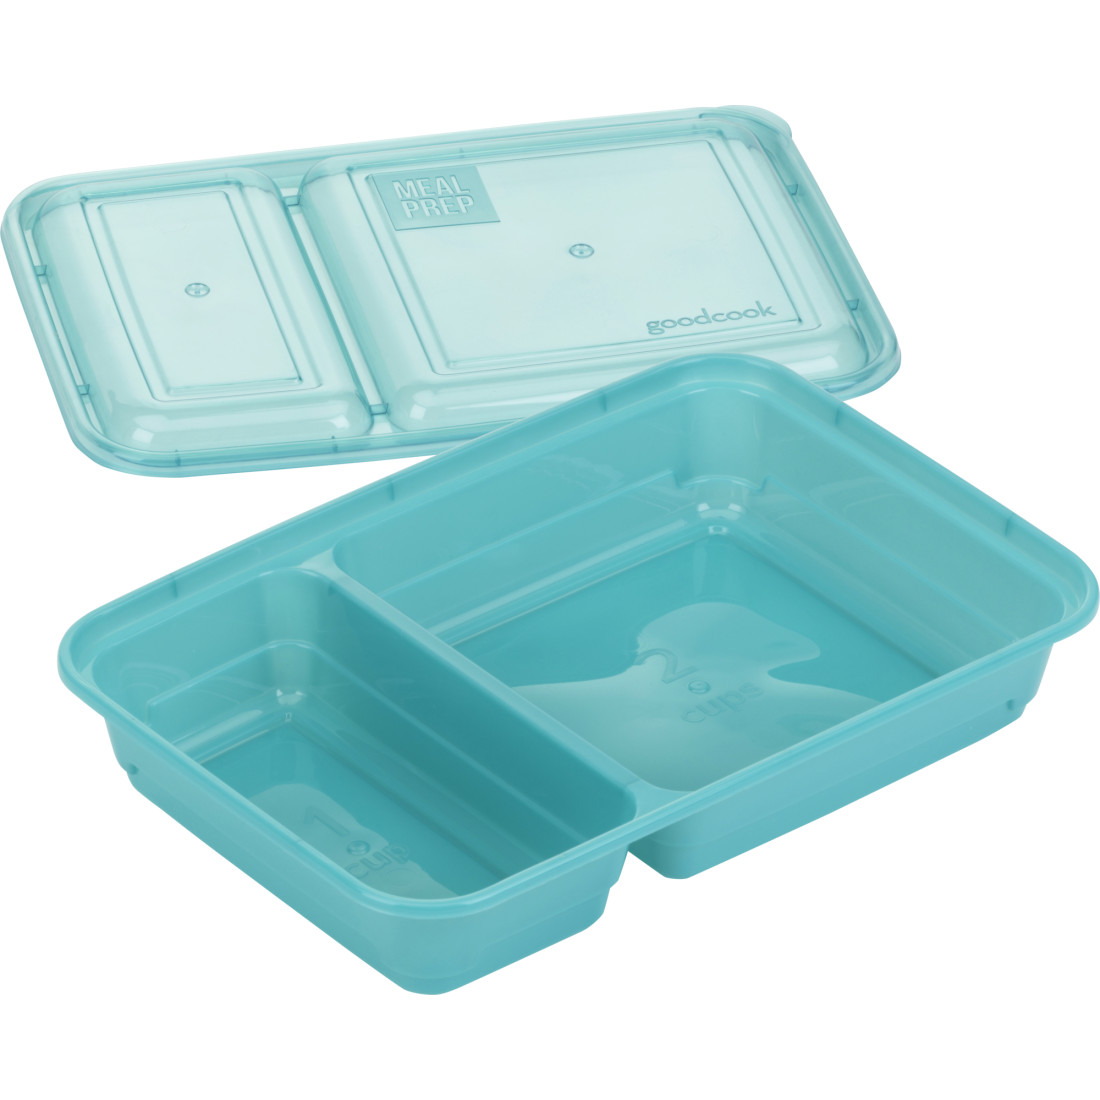 Good Cook Meal Prep, 2 Compartment BPA Free,  Microwavable/Dishwasher/Freezer Safe, Teal